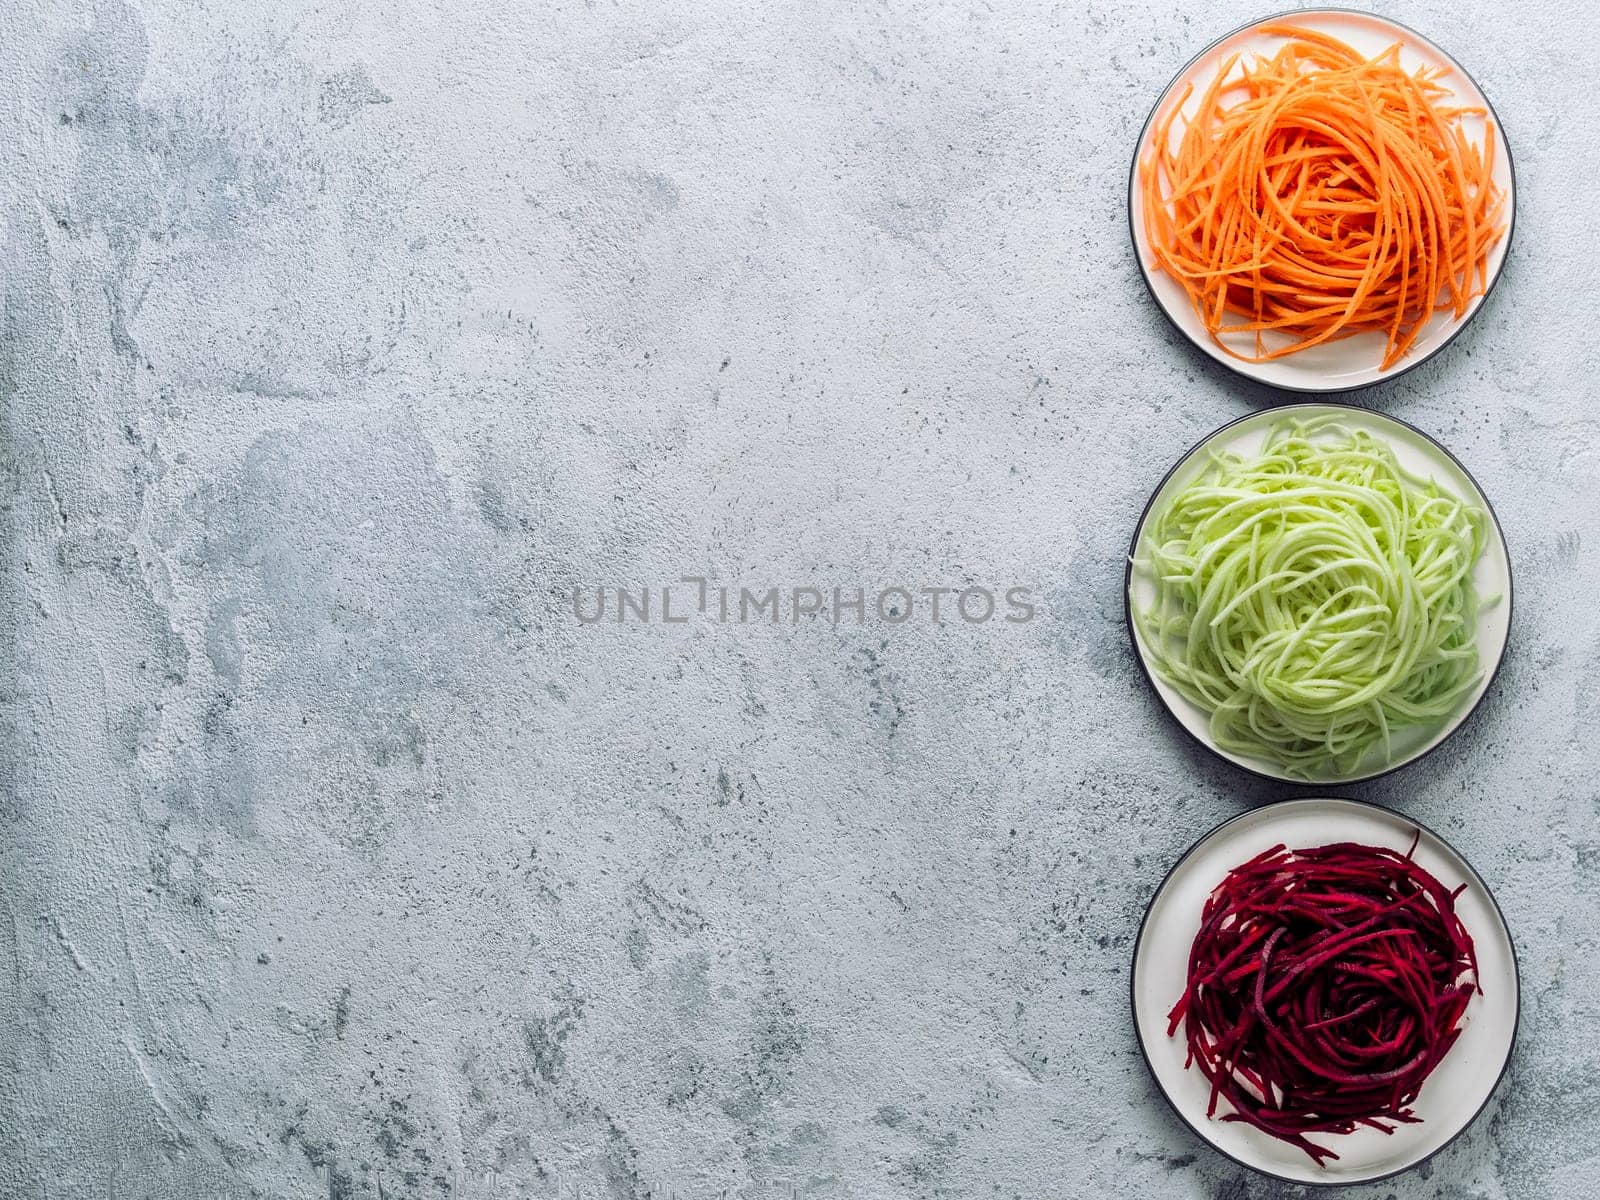 Vegetable noodles - zucchini, carrot, and beetroot noodles on plate over gray cement background. Clean eating, raw vegetarian, food concept. Copy space for text. Top view or flat lay.